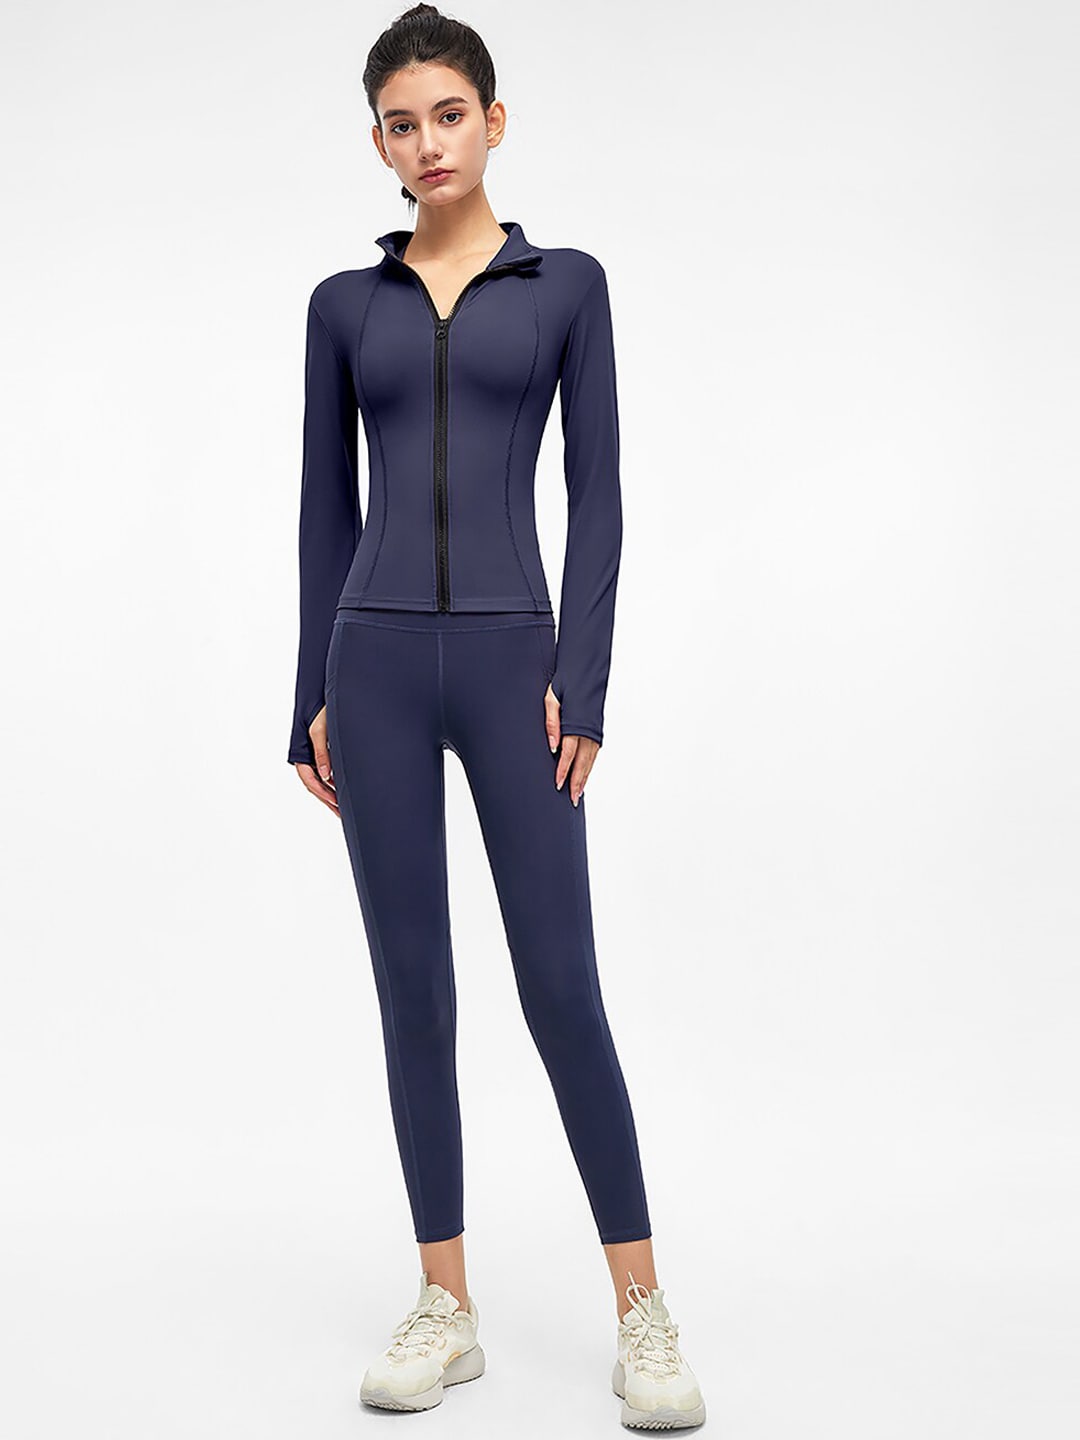 JC Collection Women Blue Solid Sports Tracksuit Price in India